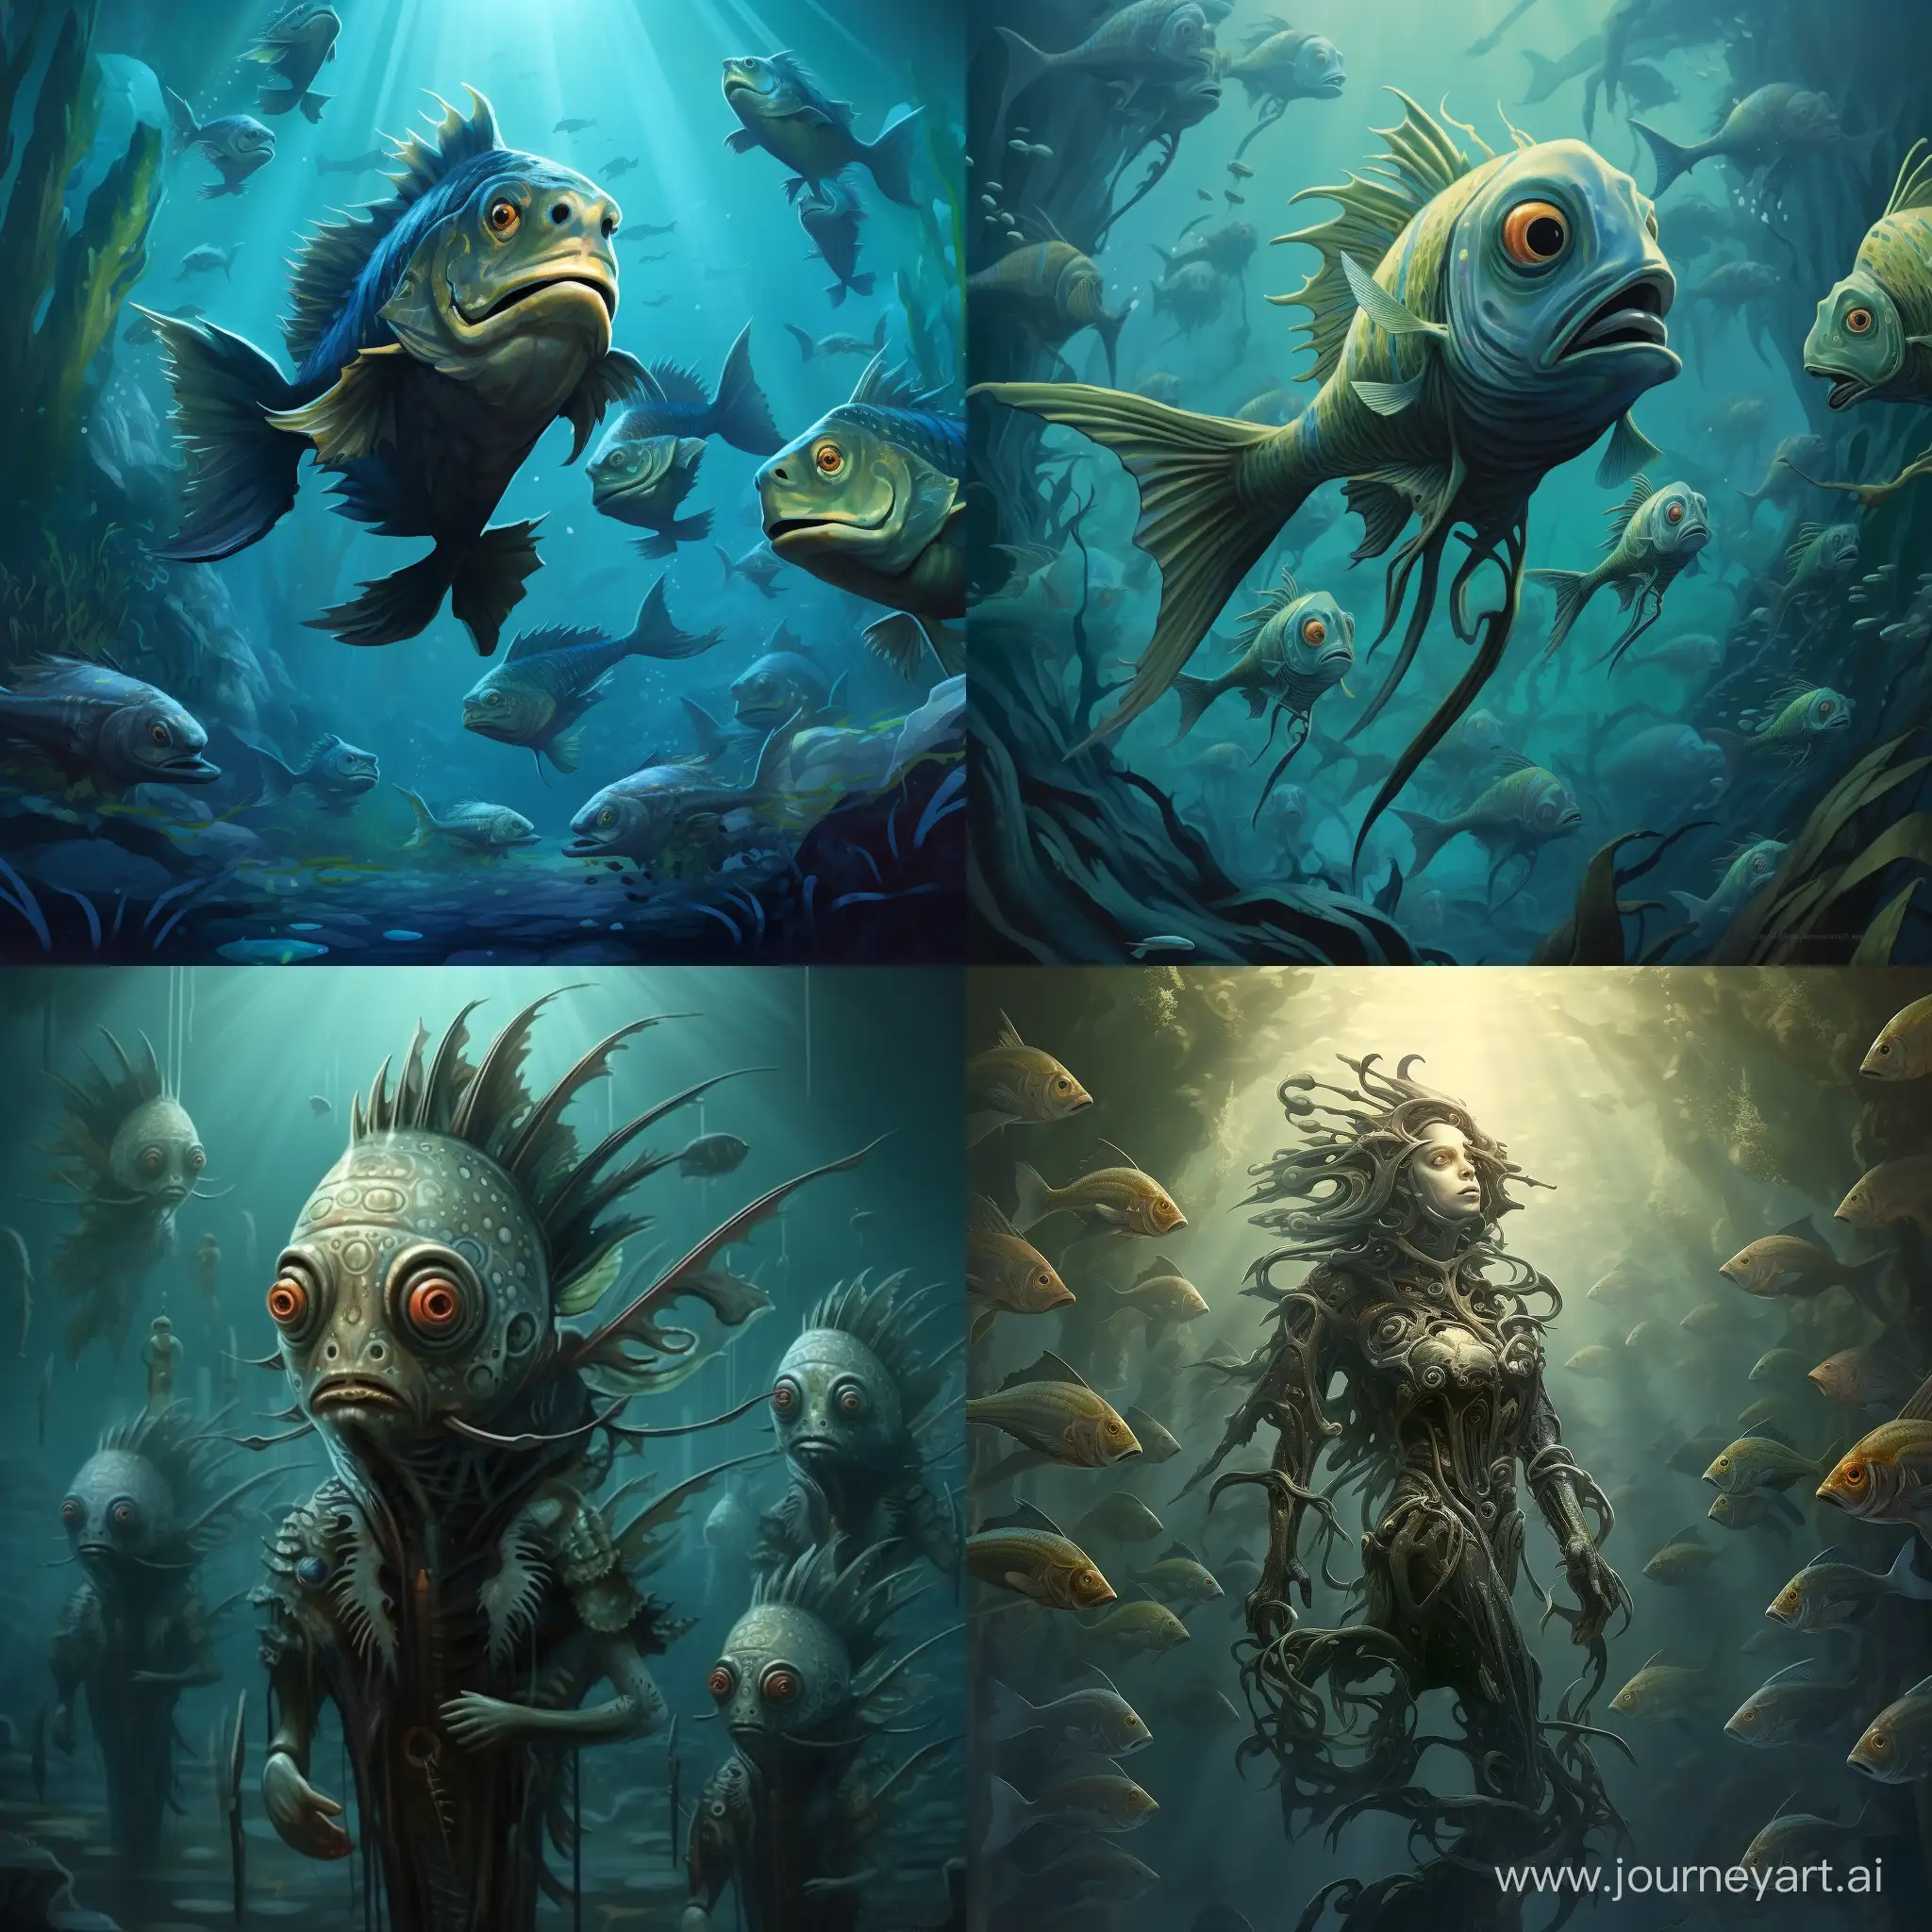 A fantastic race of fish people living deep underwater. They have the head of a fish, fins and tail like a fish, legs and arms like a human.